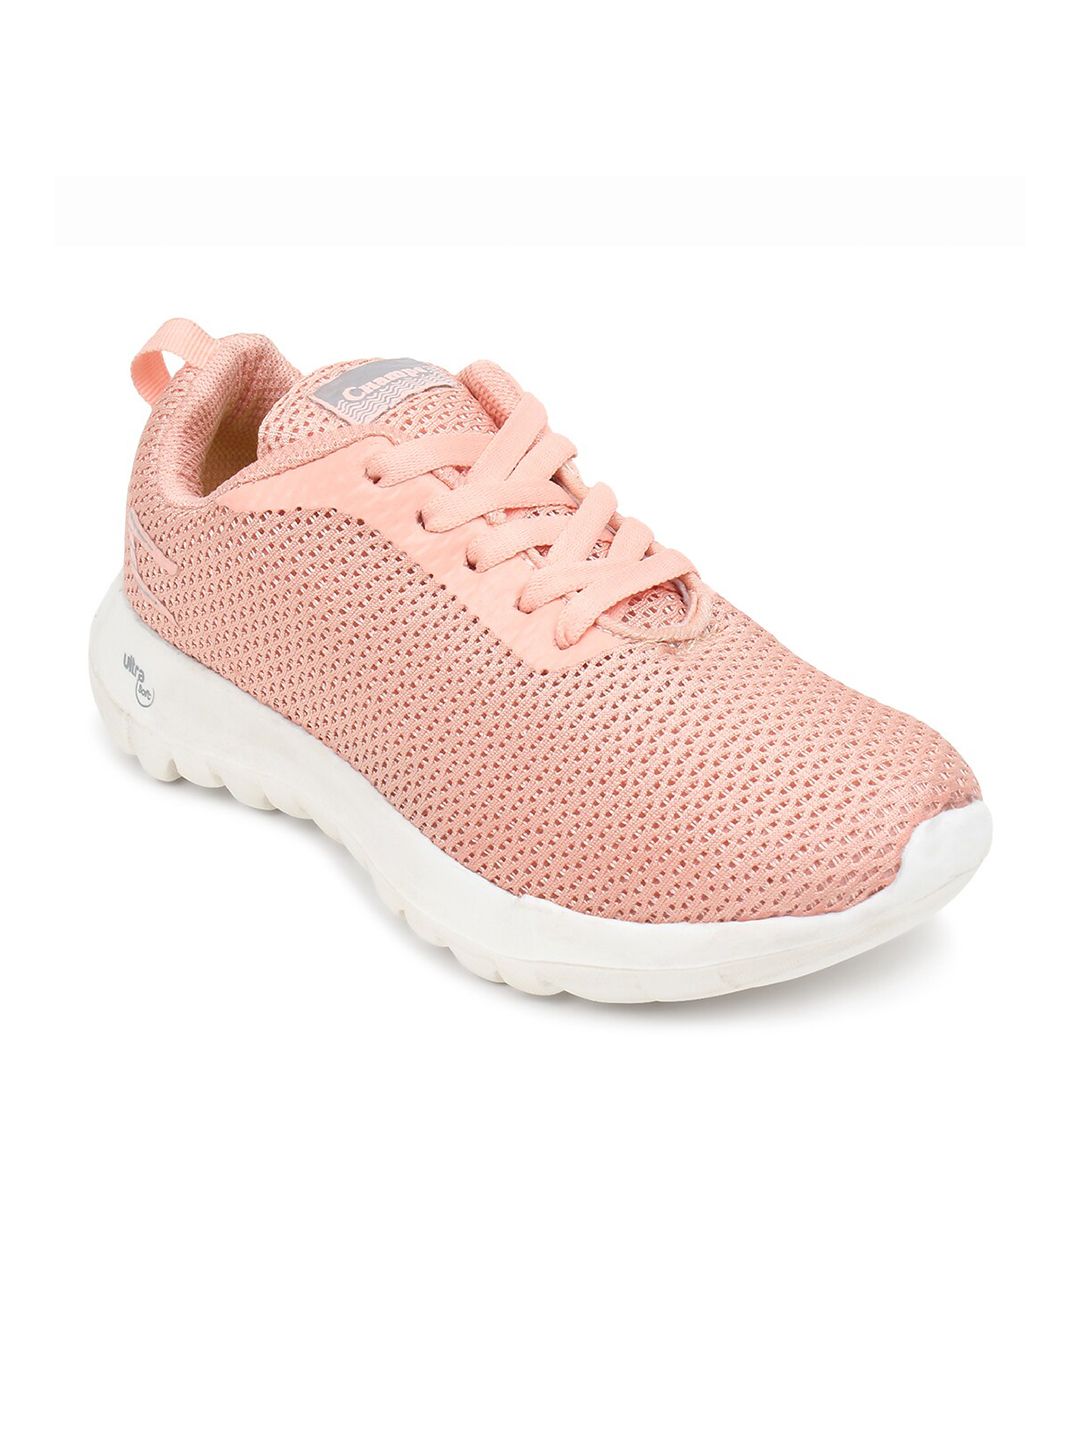 Champs Women Peach-Coloured Running Shoes Price in India